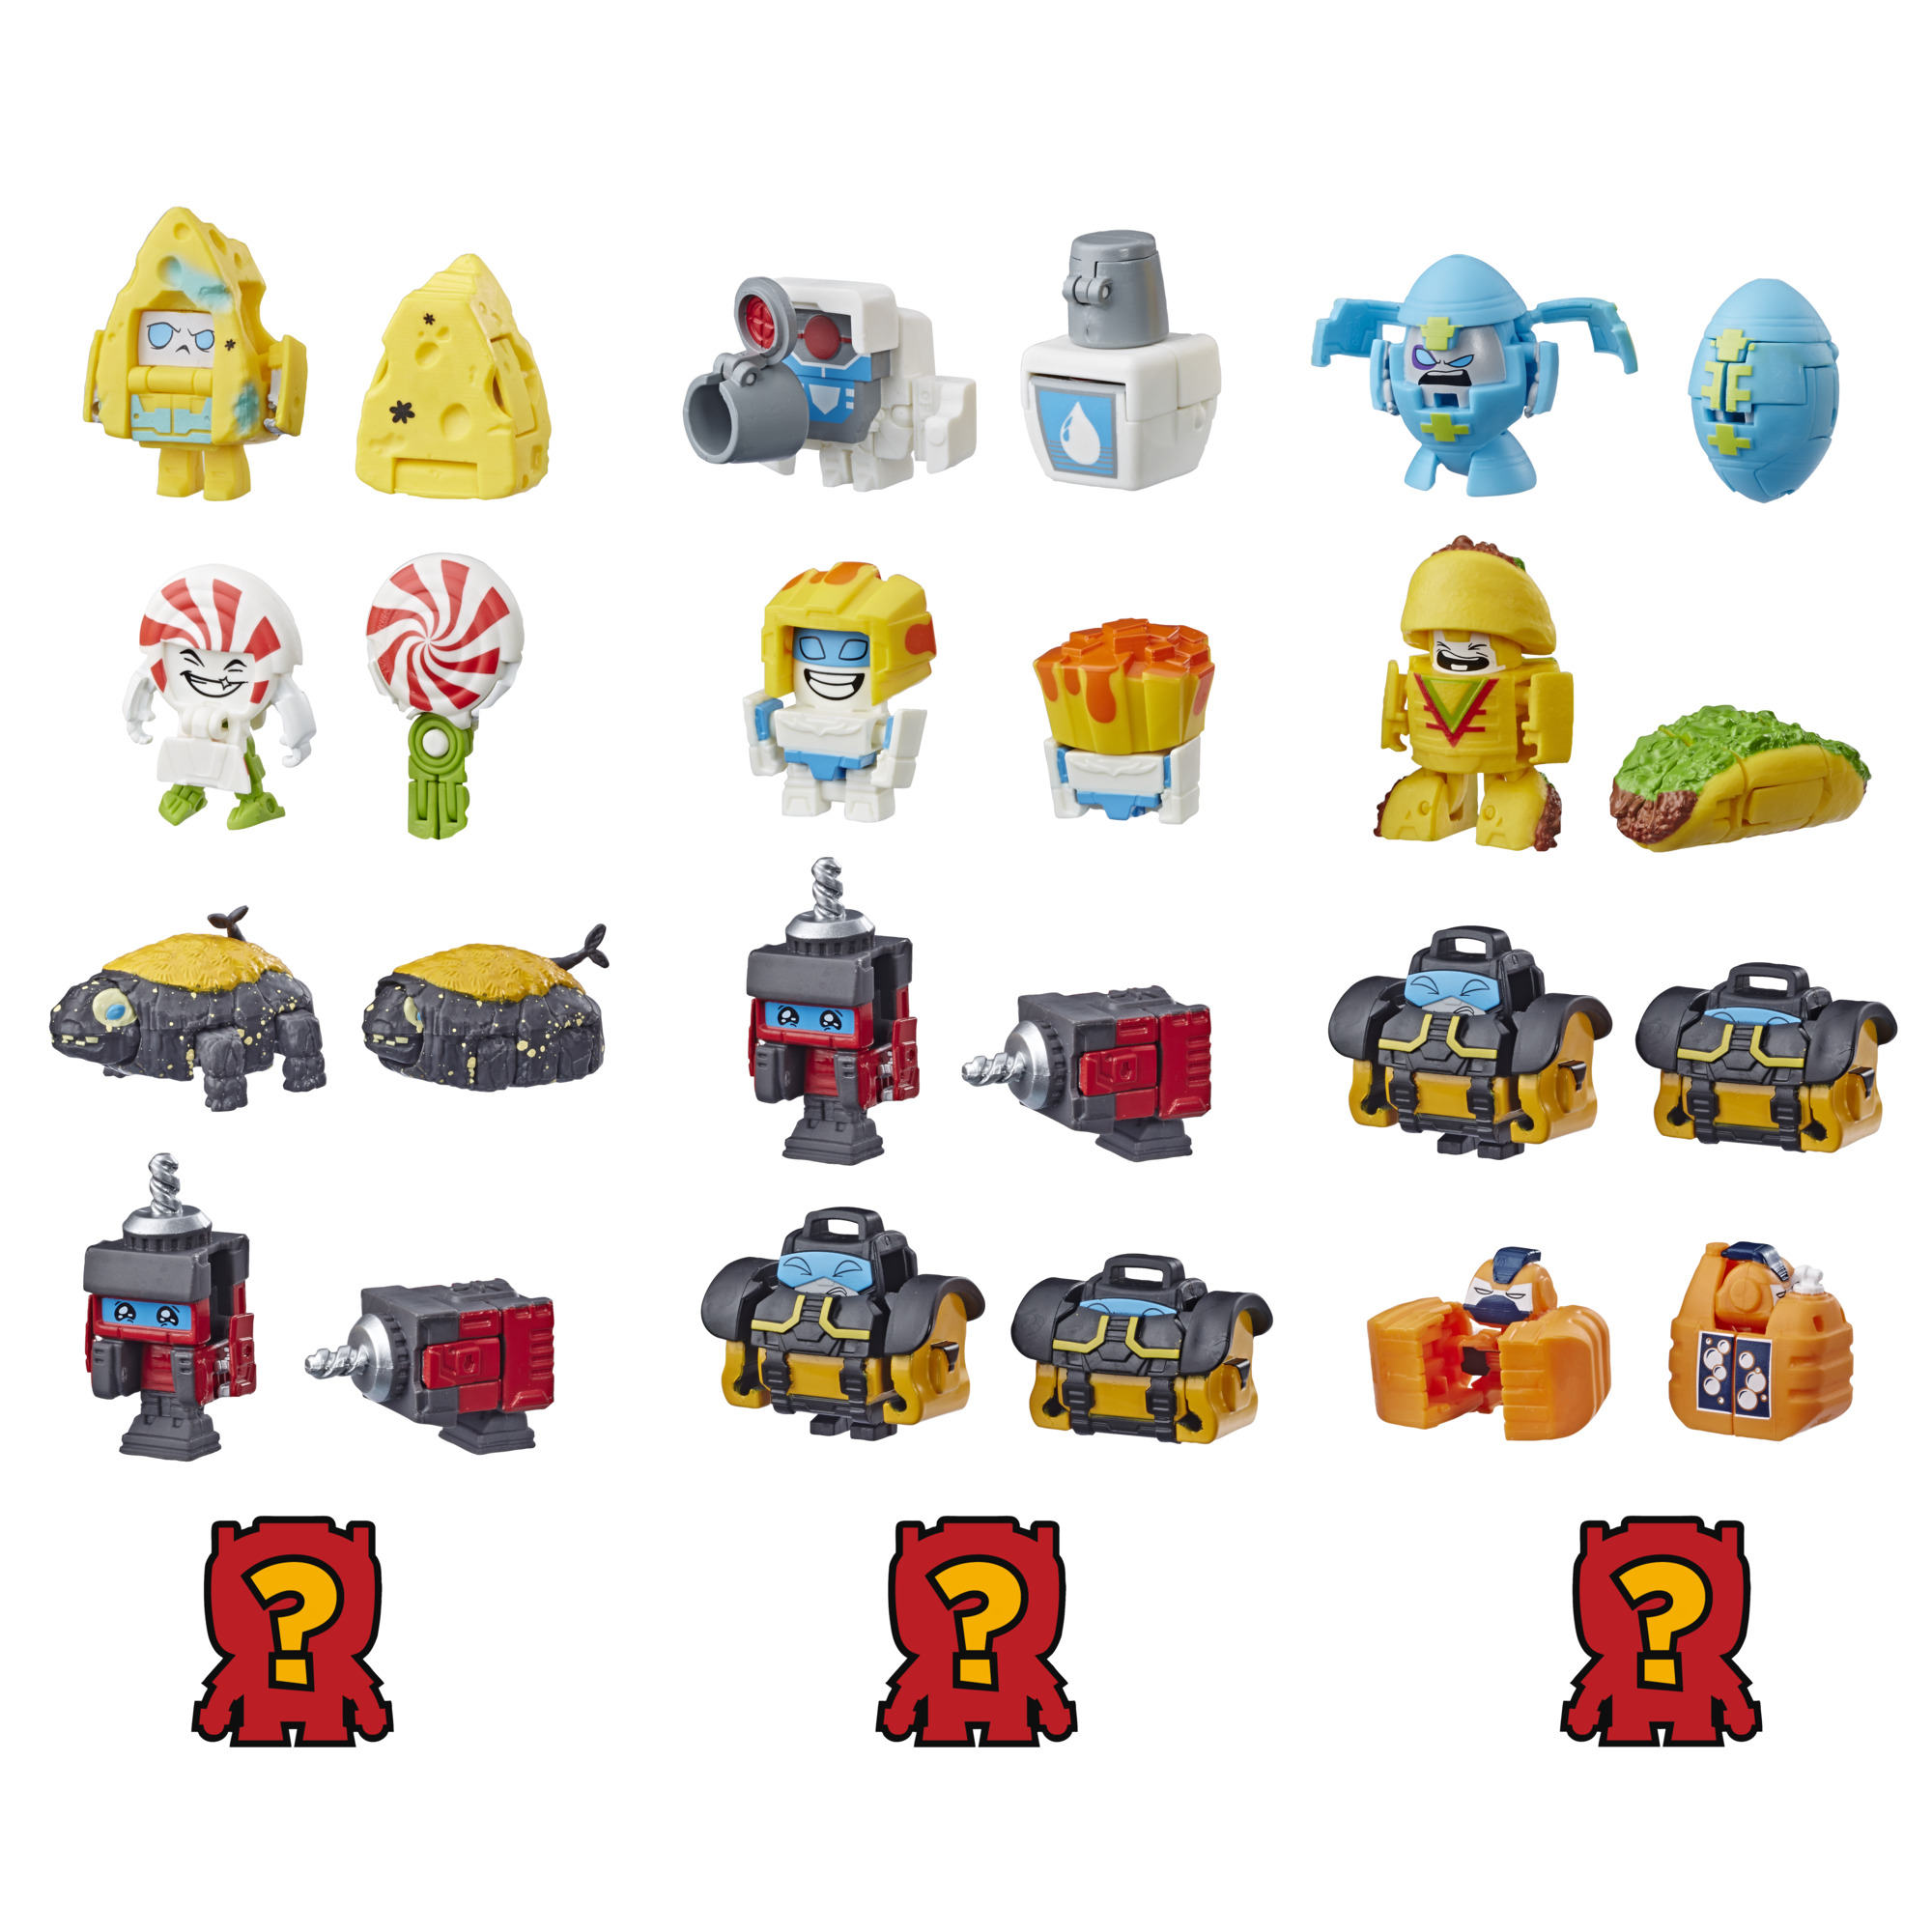 Transformers Toys BotBots Series 2 Shed Heads 5-Pack - image 1 of 7